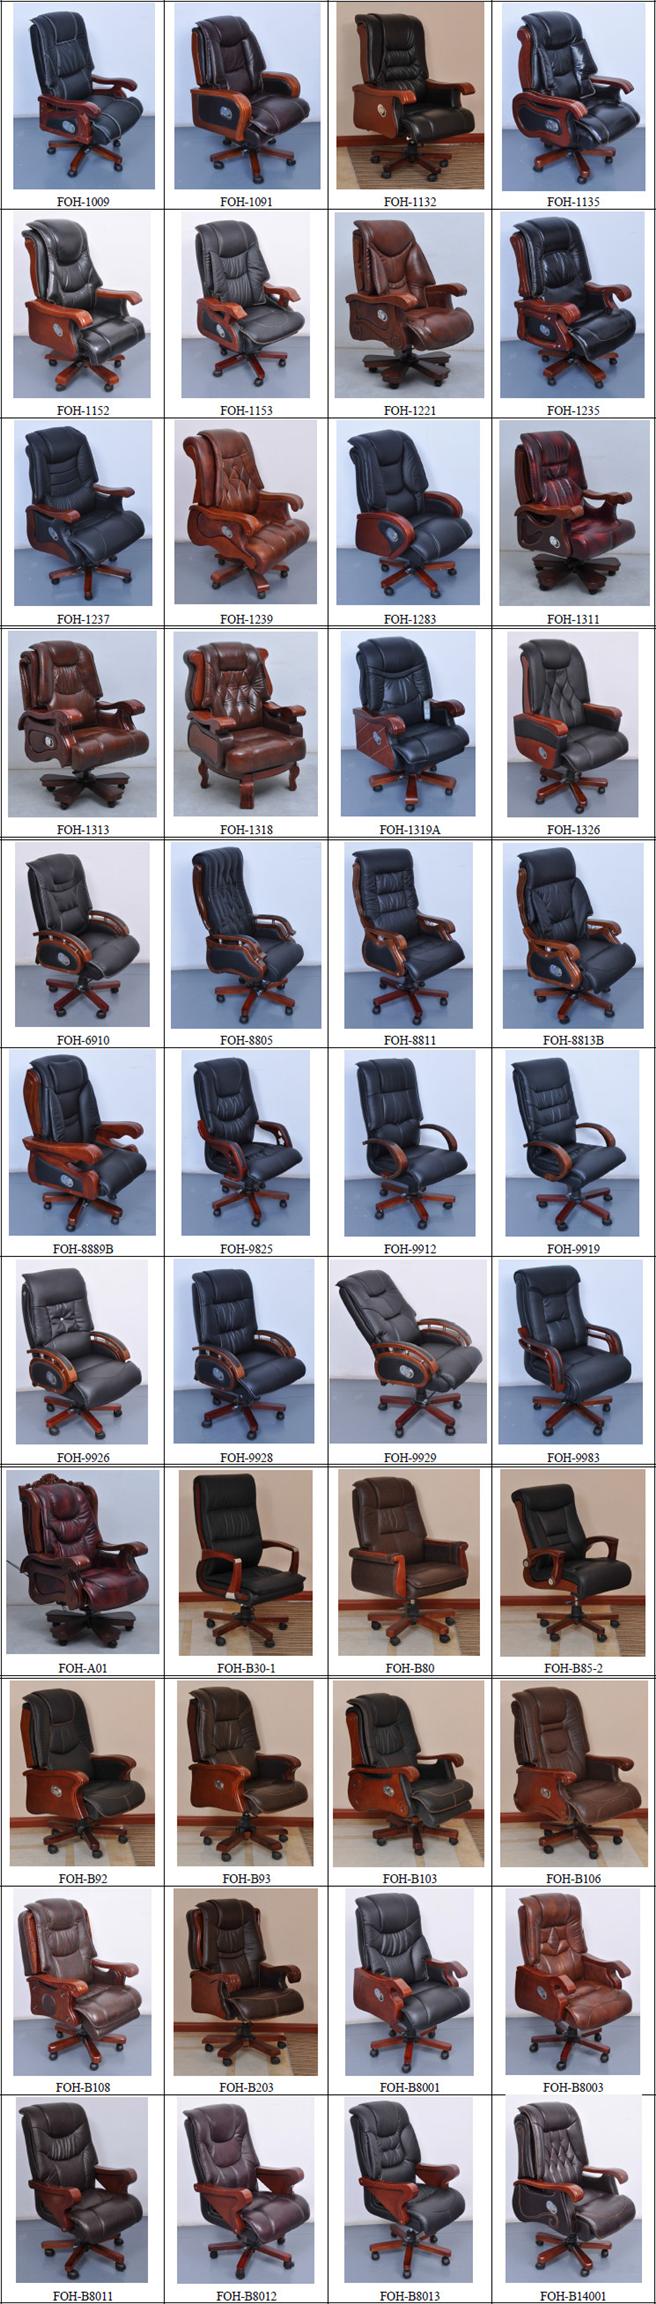 Top Quality Tiltable Swivel Executive Chair, Office Chair (FOH-9929)